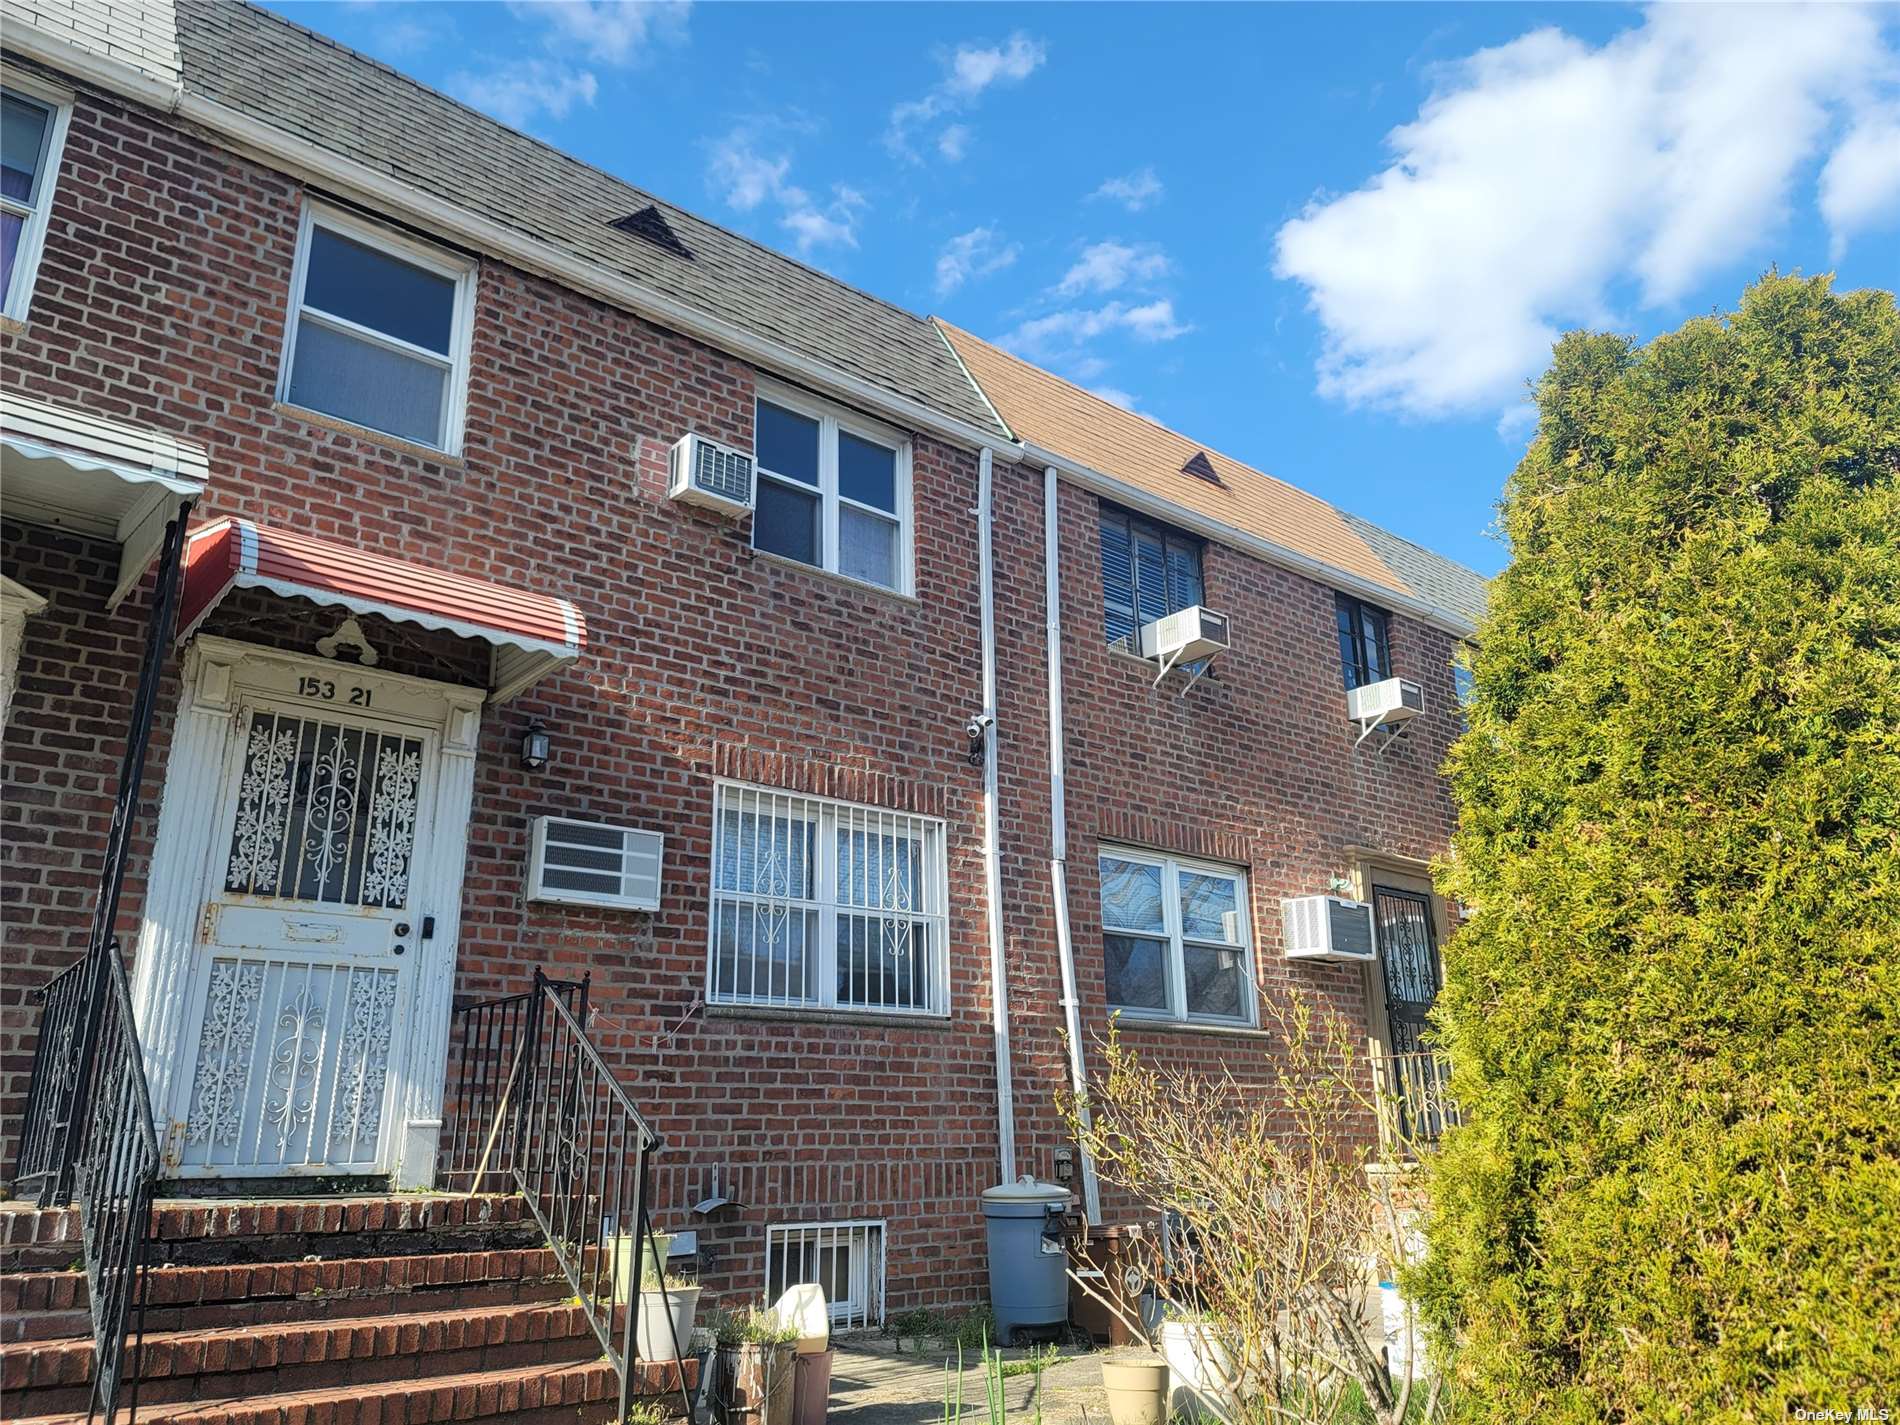 View Flushing, NY 11367 townhome